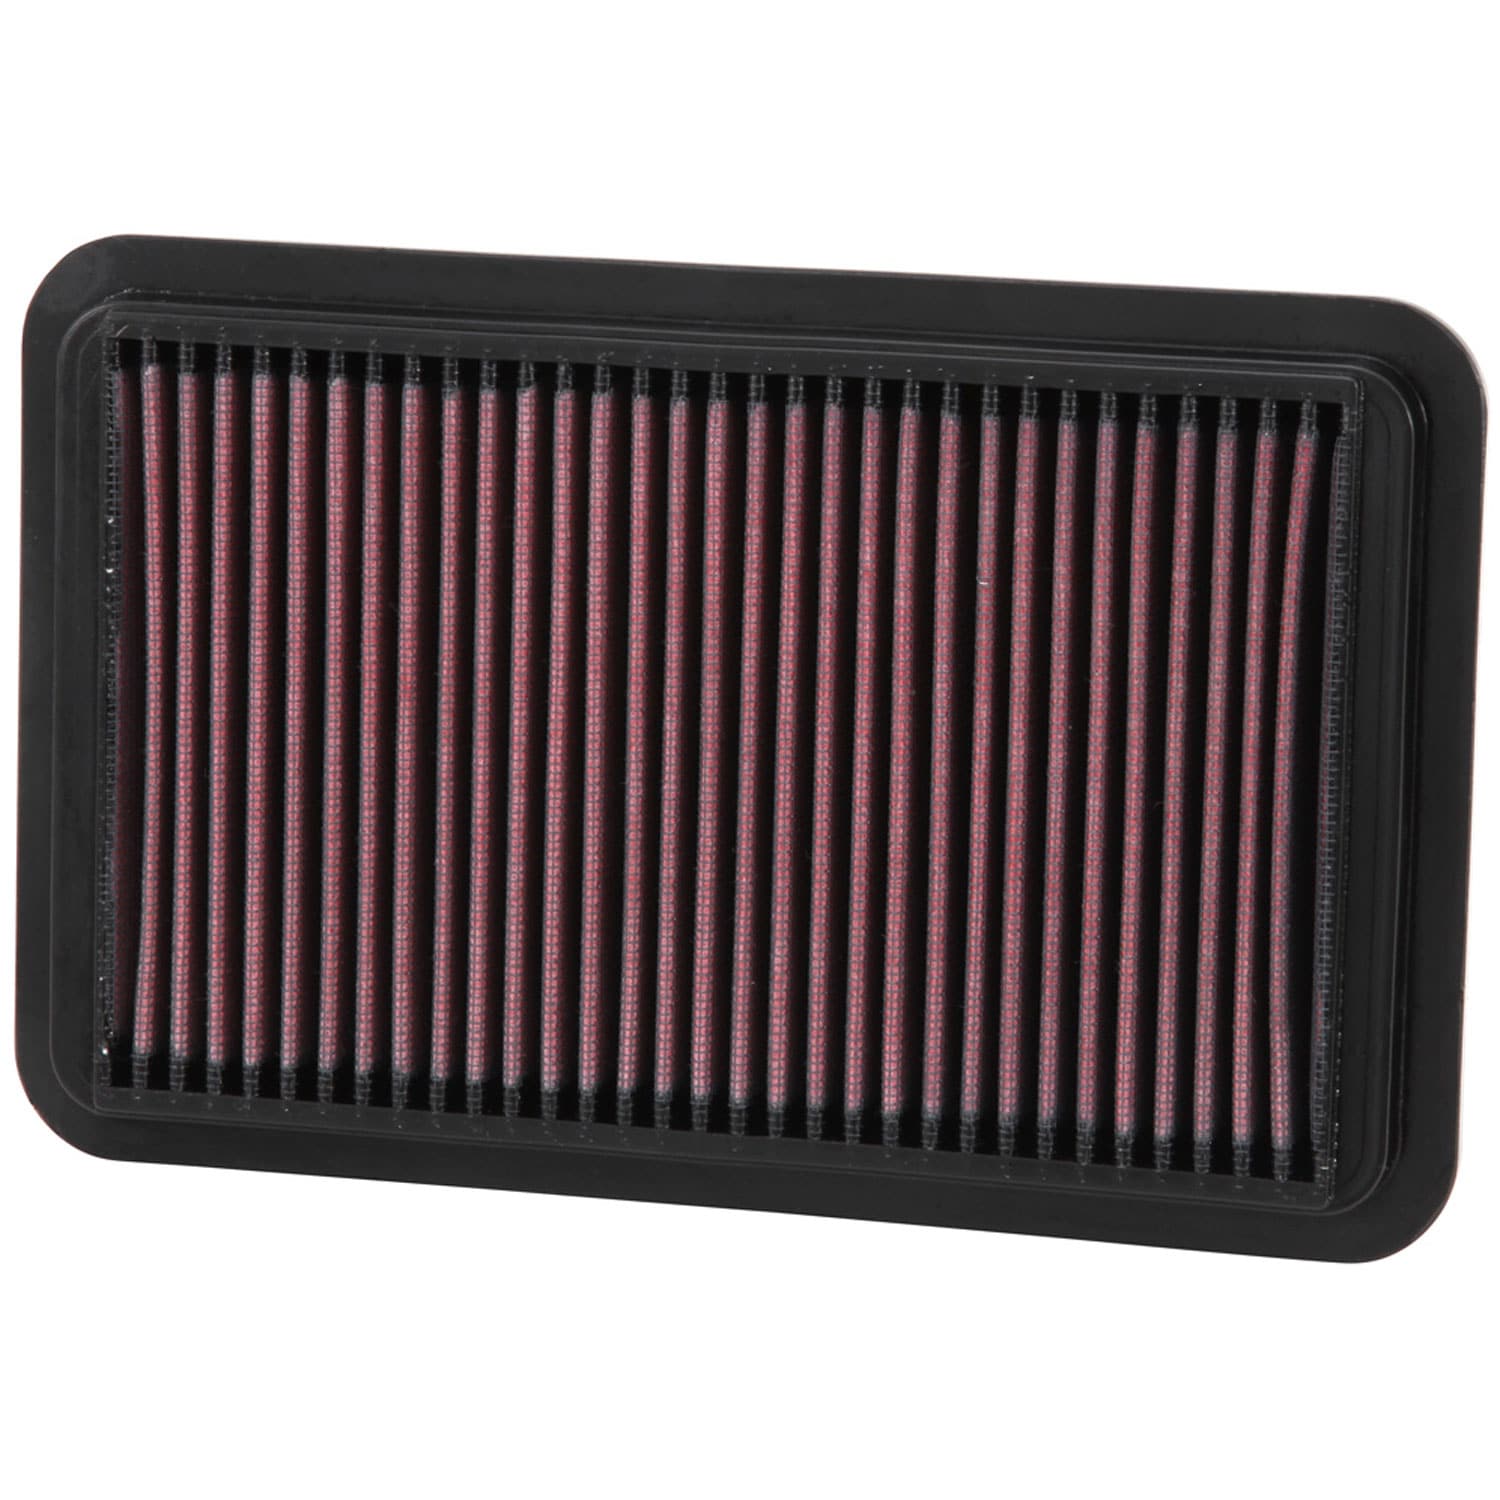 K&N Engine Air Filter: Reusable, Clean Every 75,000 Miles, Washable,  Replacement Car Air Filter: Compatible with 2003-2019  Volswagen/Audi/Seat/Skoda